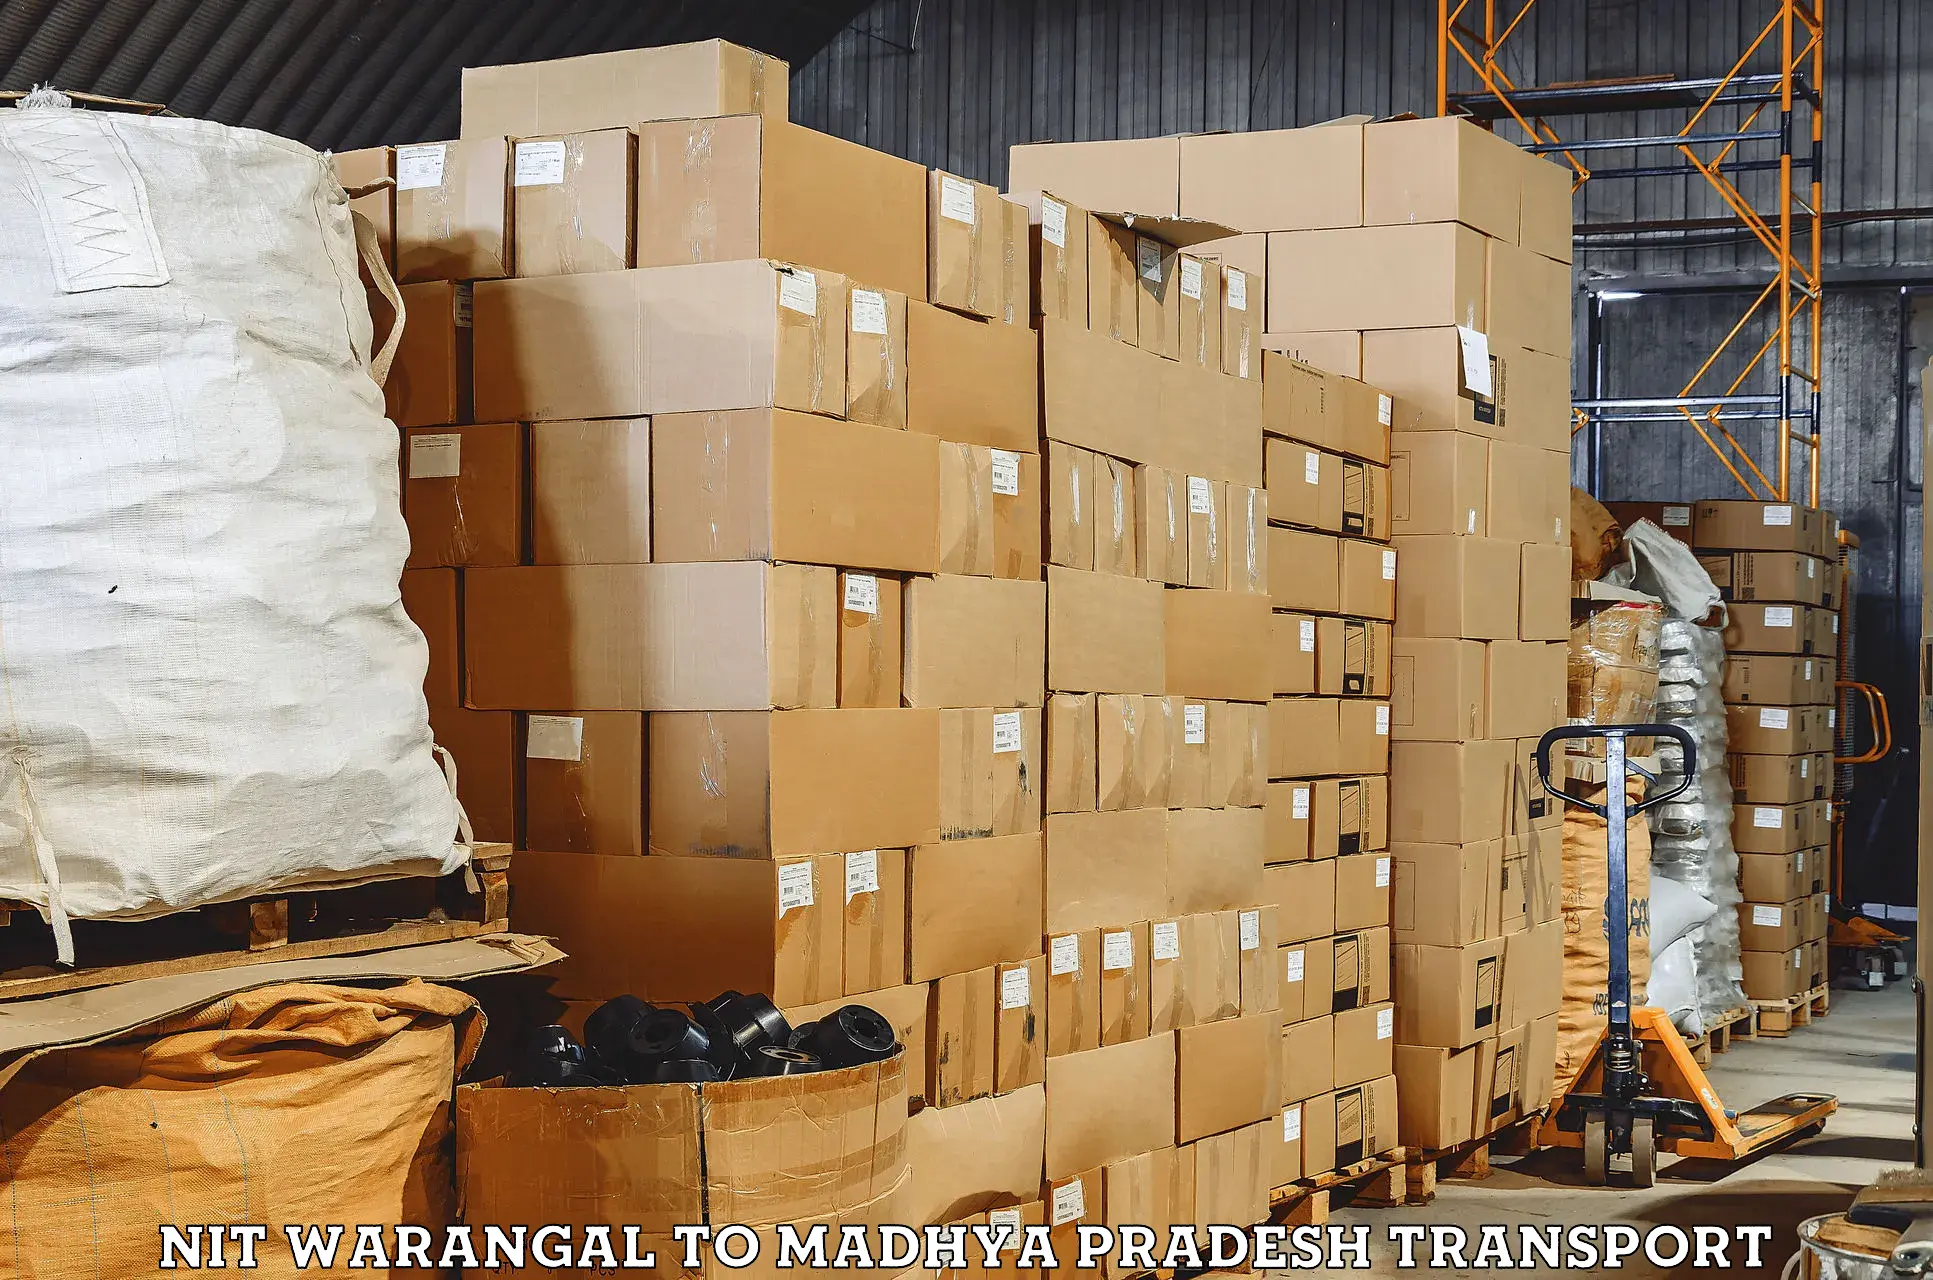 Daily parcel service transport NIT Warangal to Indore